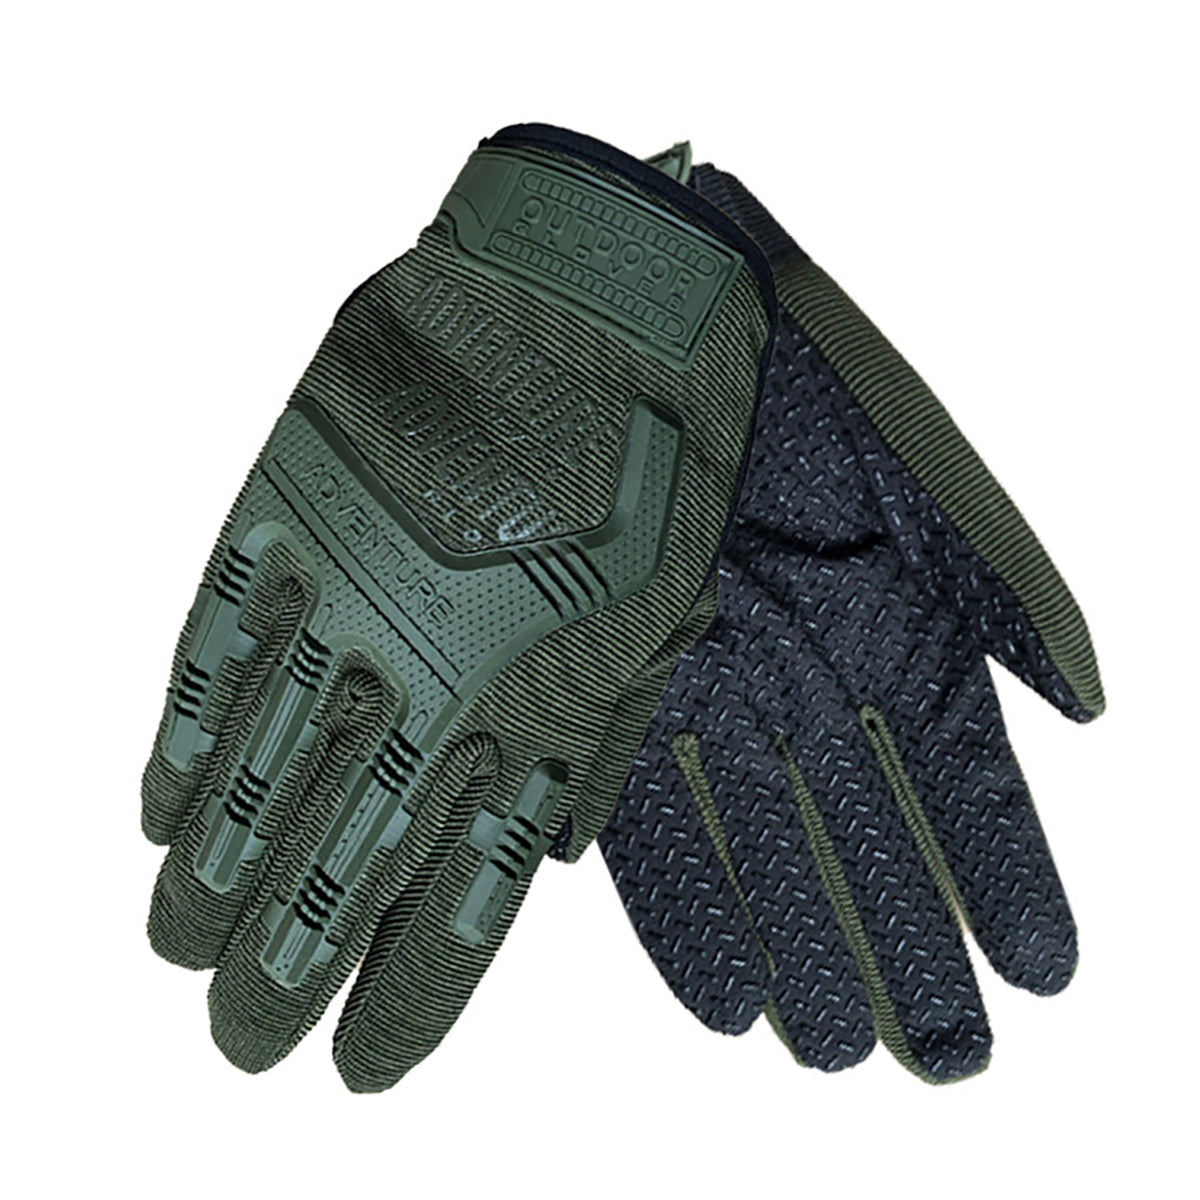 Dark Slate Gray Motorcycle Full Finger Tactical Gloves Military Army Outdoor Hunting Cycling Sports